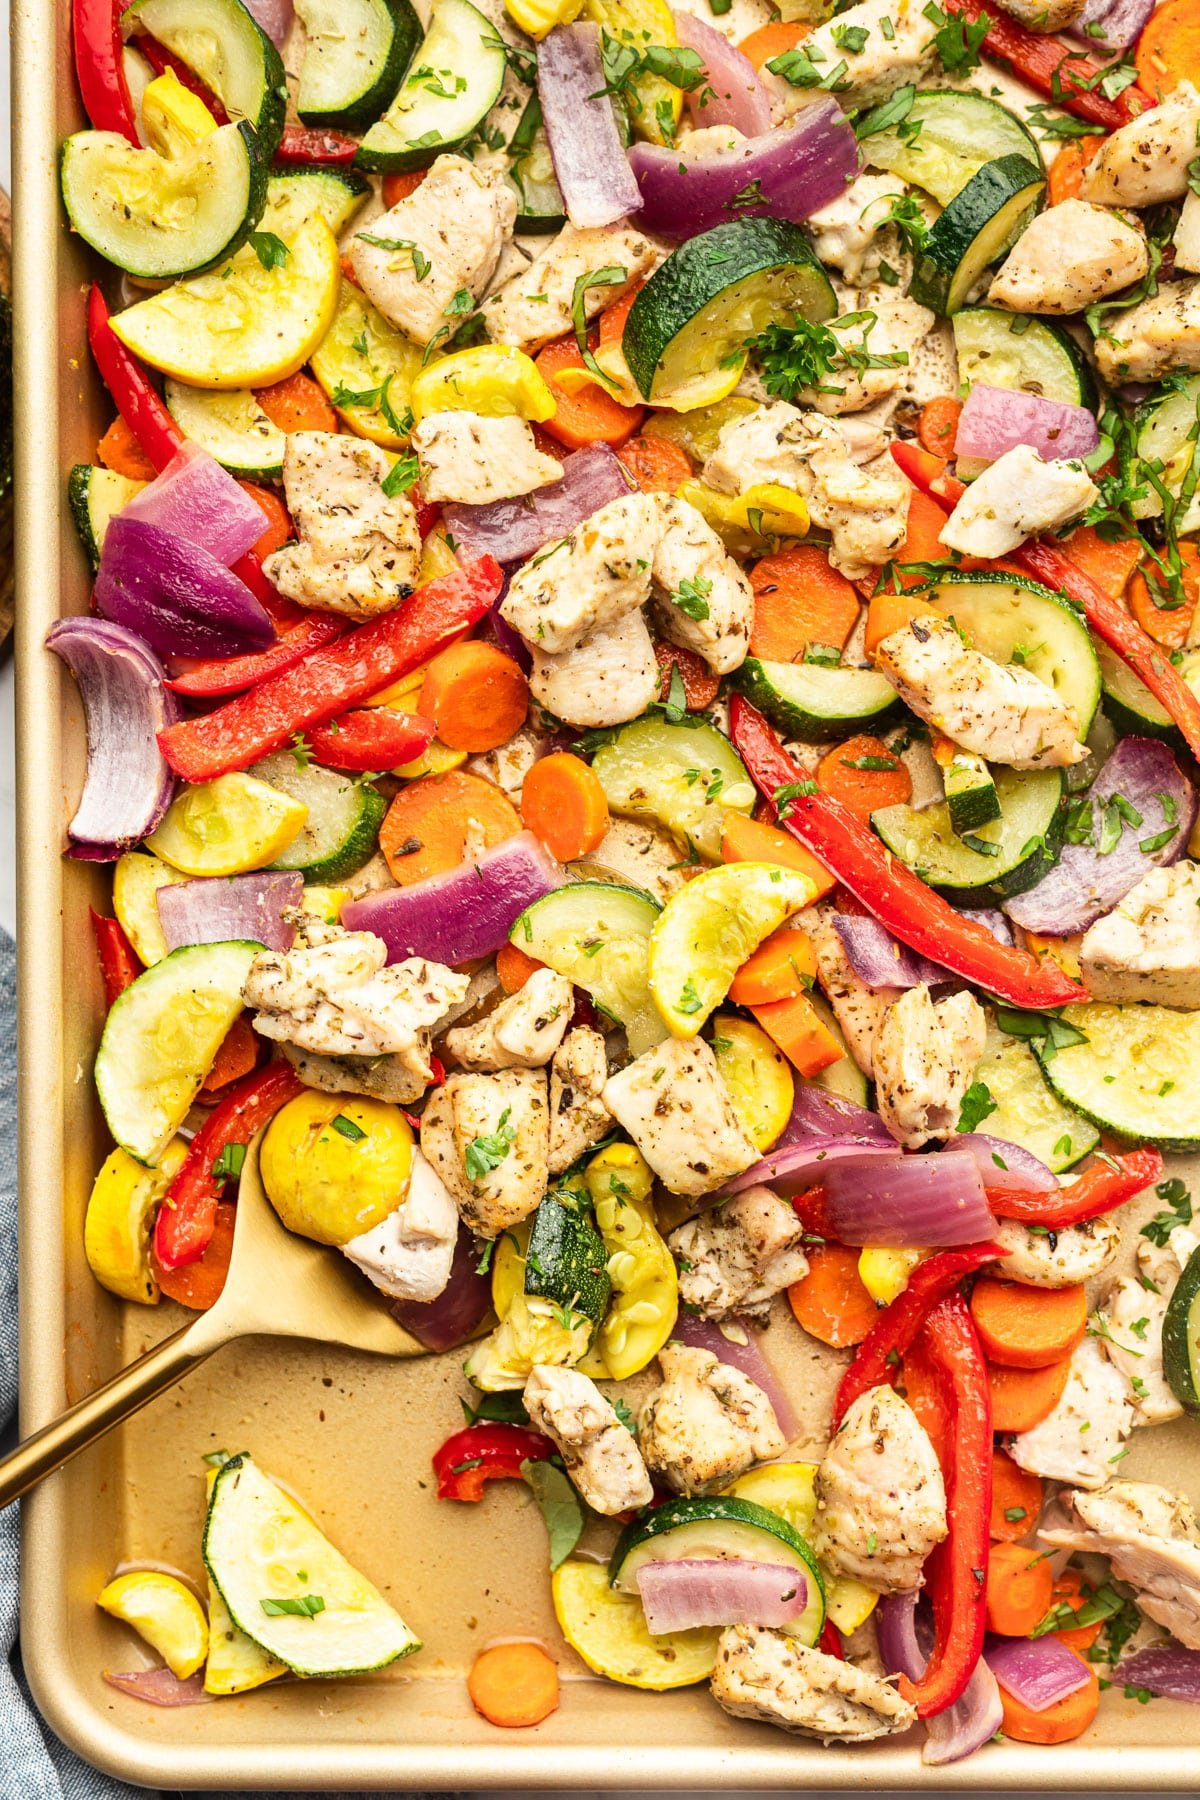 https://thewholecook.com/wp-content/uploads/2023/08/Sheet-Pan-Chicken-and-Vegetables-1-3.jpg